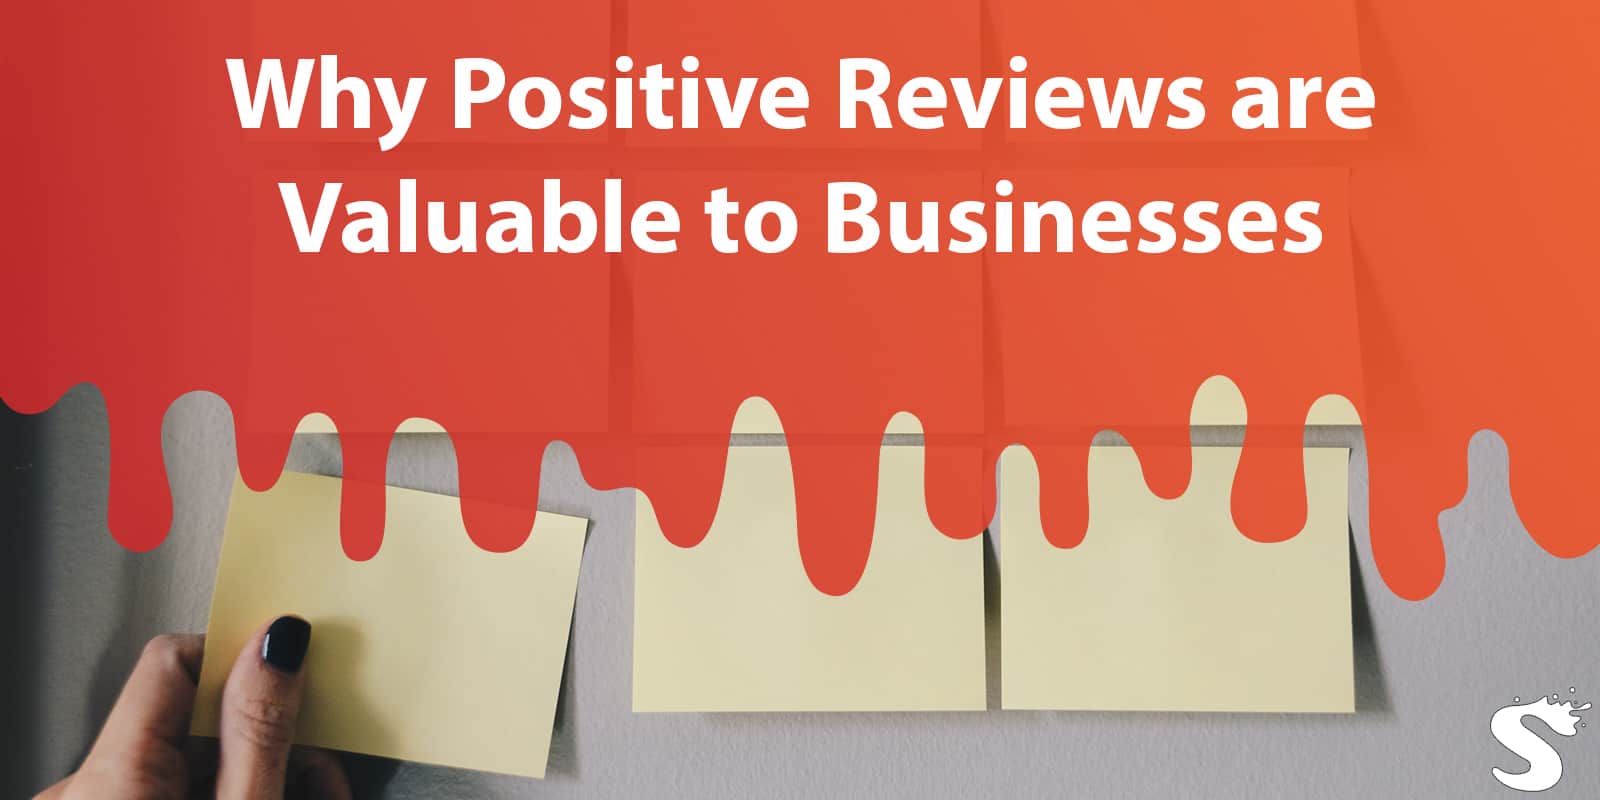 Why Positive Reviews are Valuable to Small Businesses